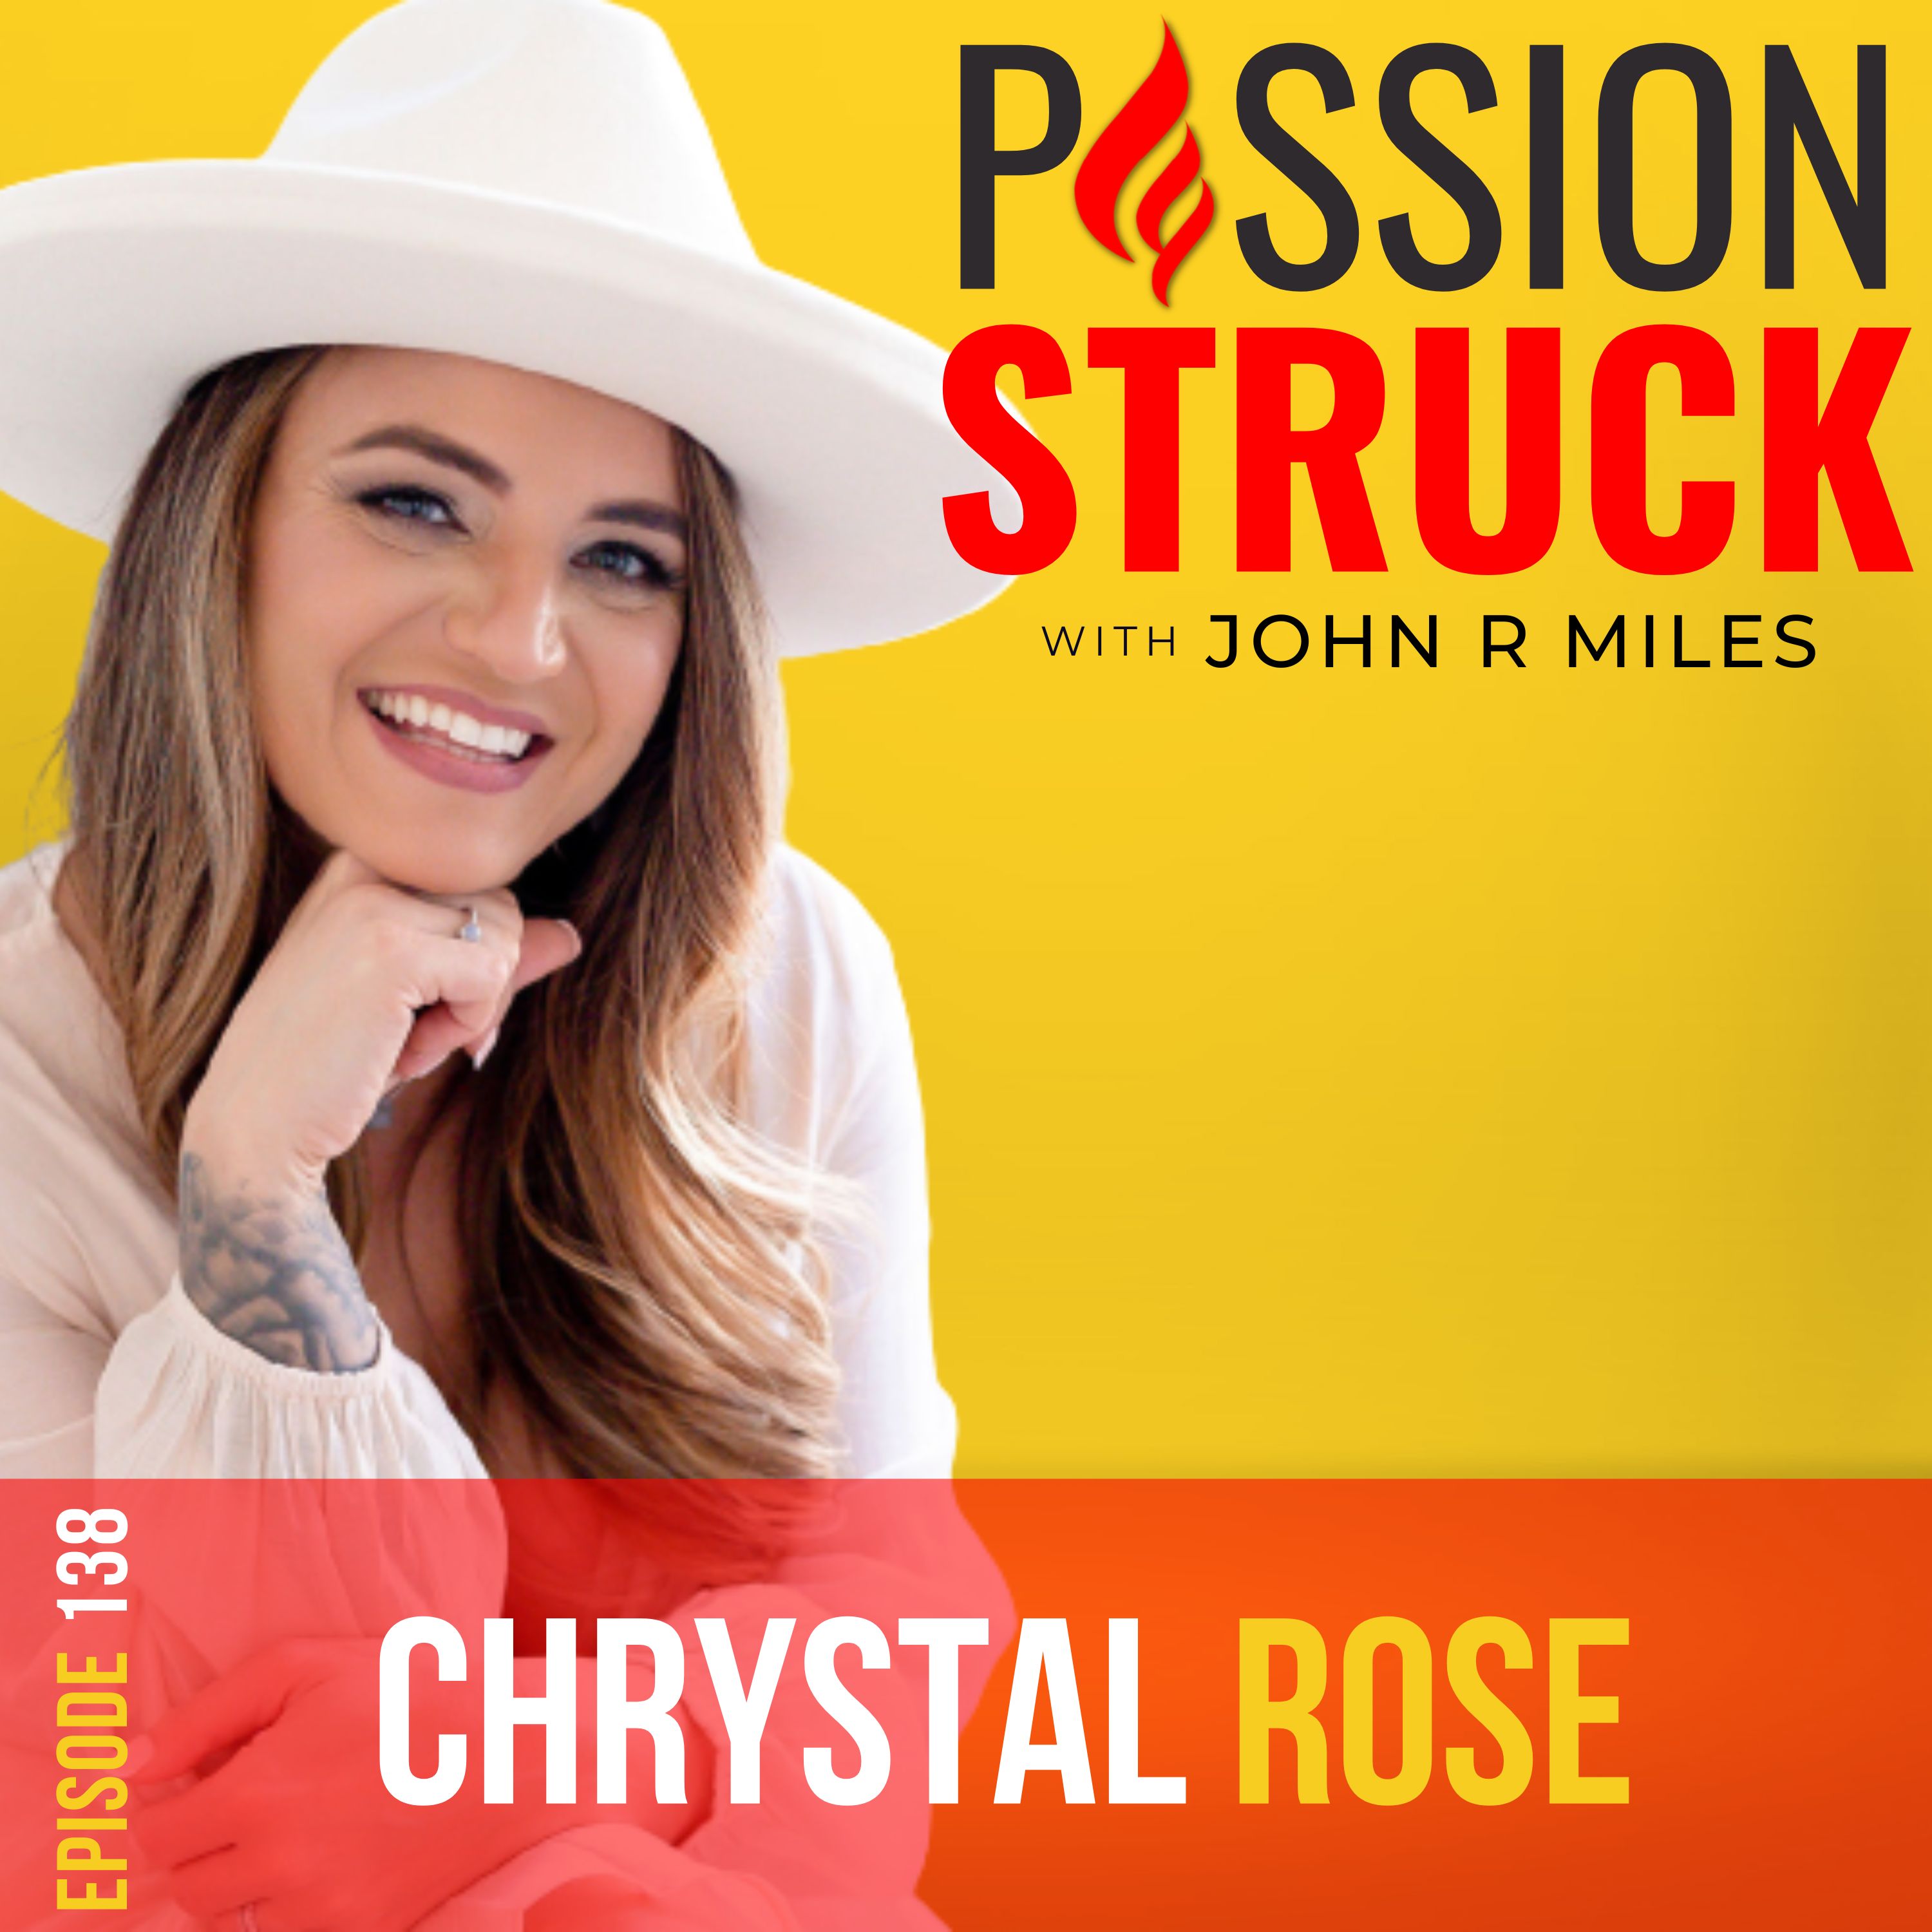 Episode 138 of Passion Struck with John R. Miles album cover featuring Chrystal Rose a podcast host, transformation coach